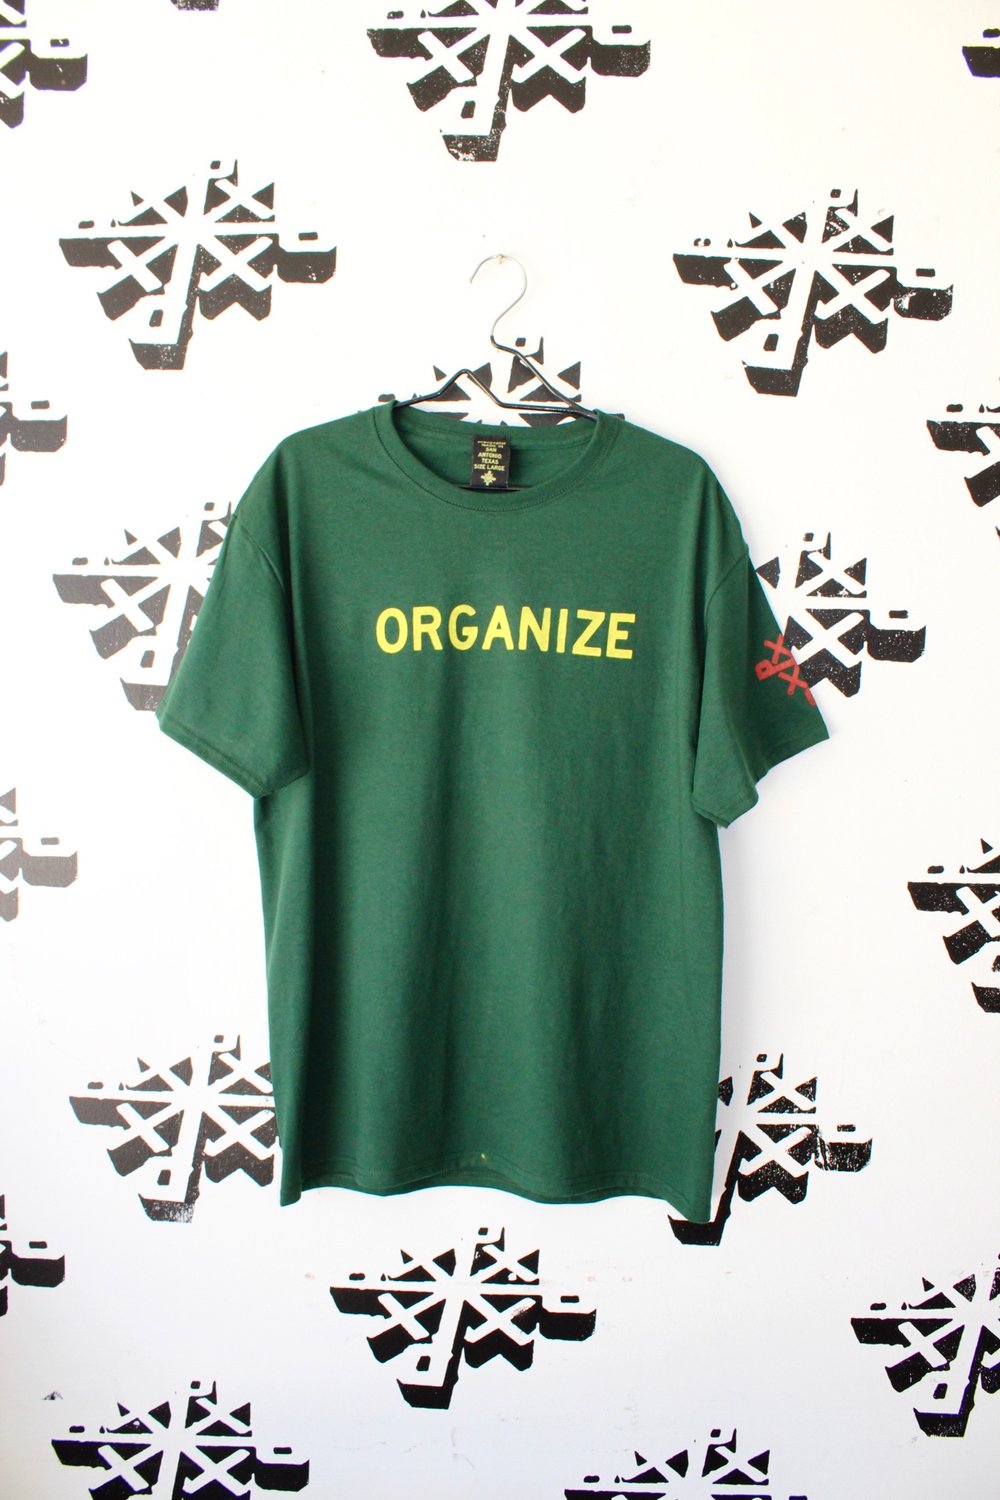 organize and DWS tee in green 